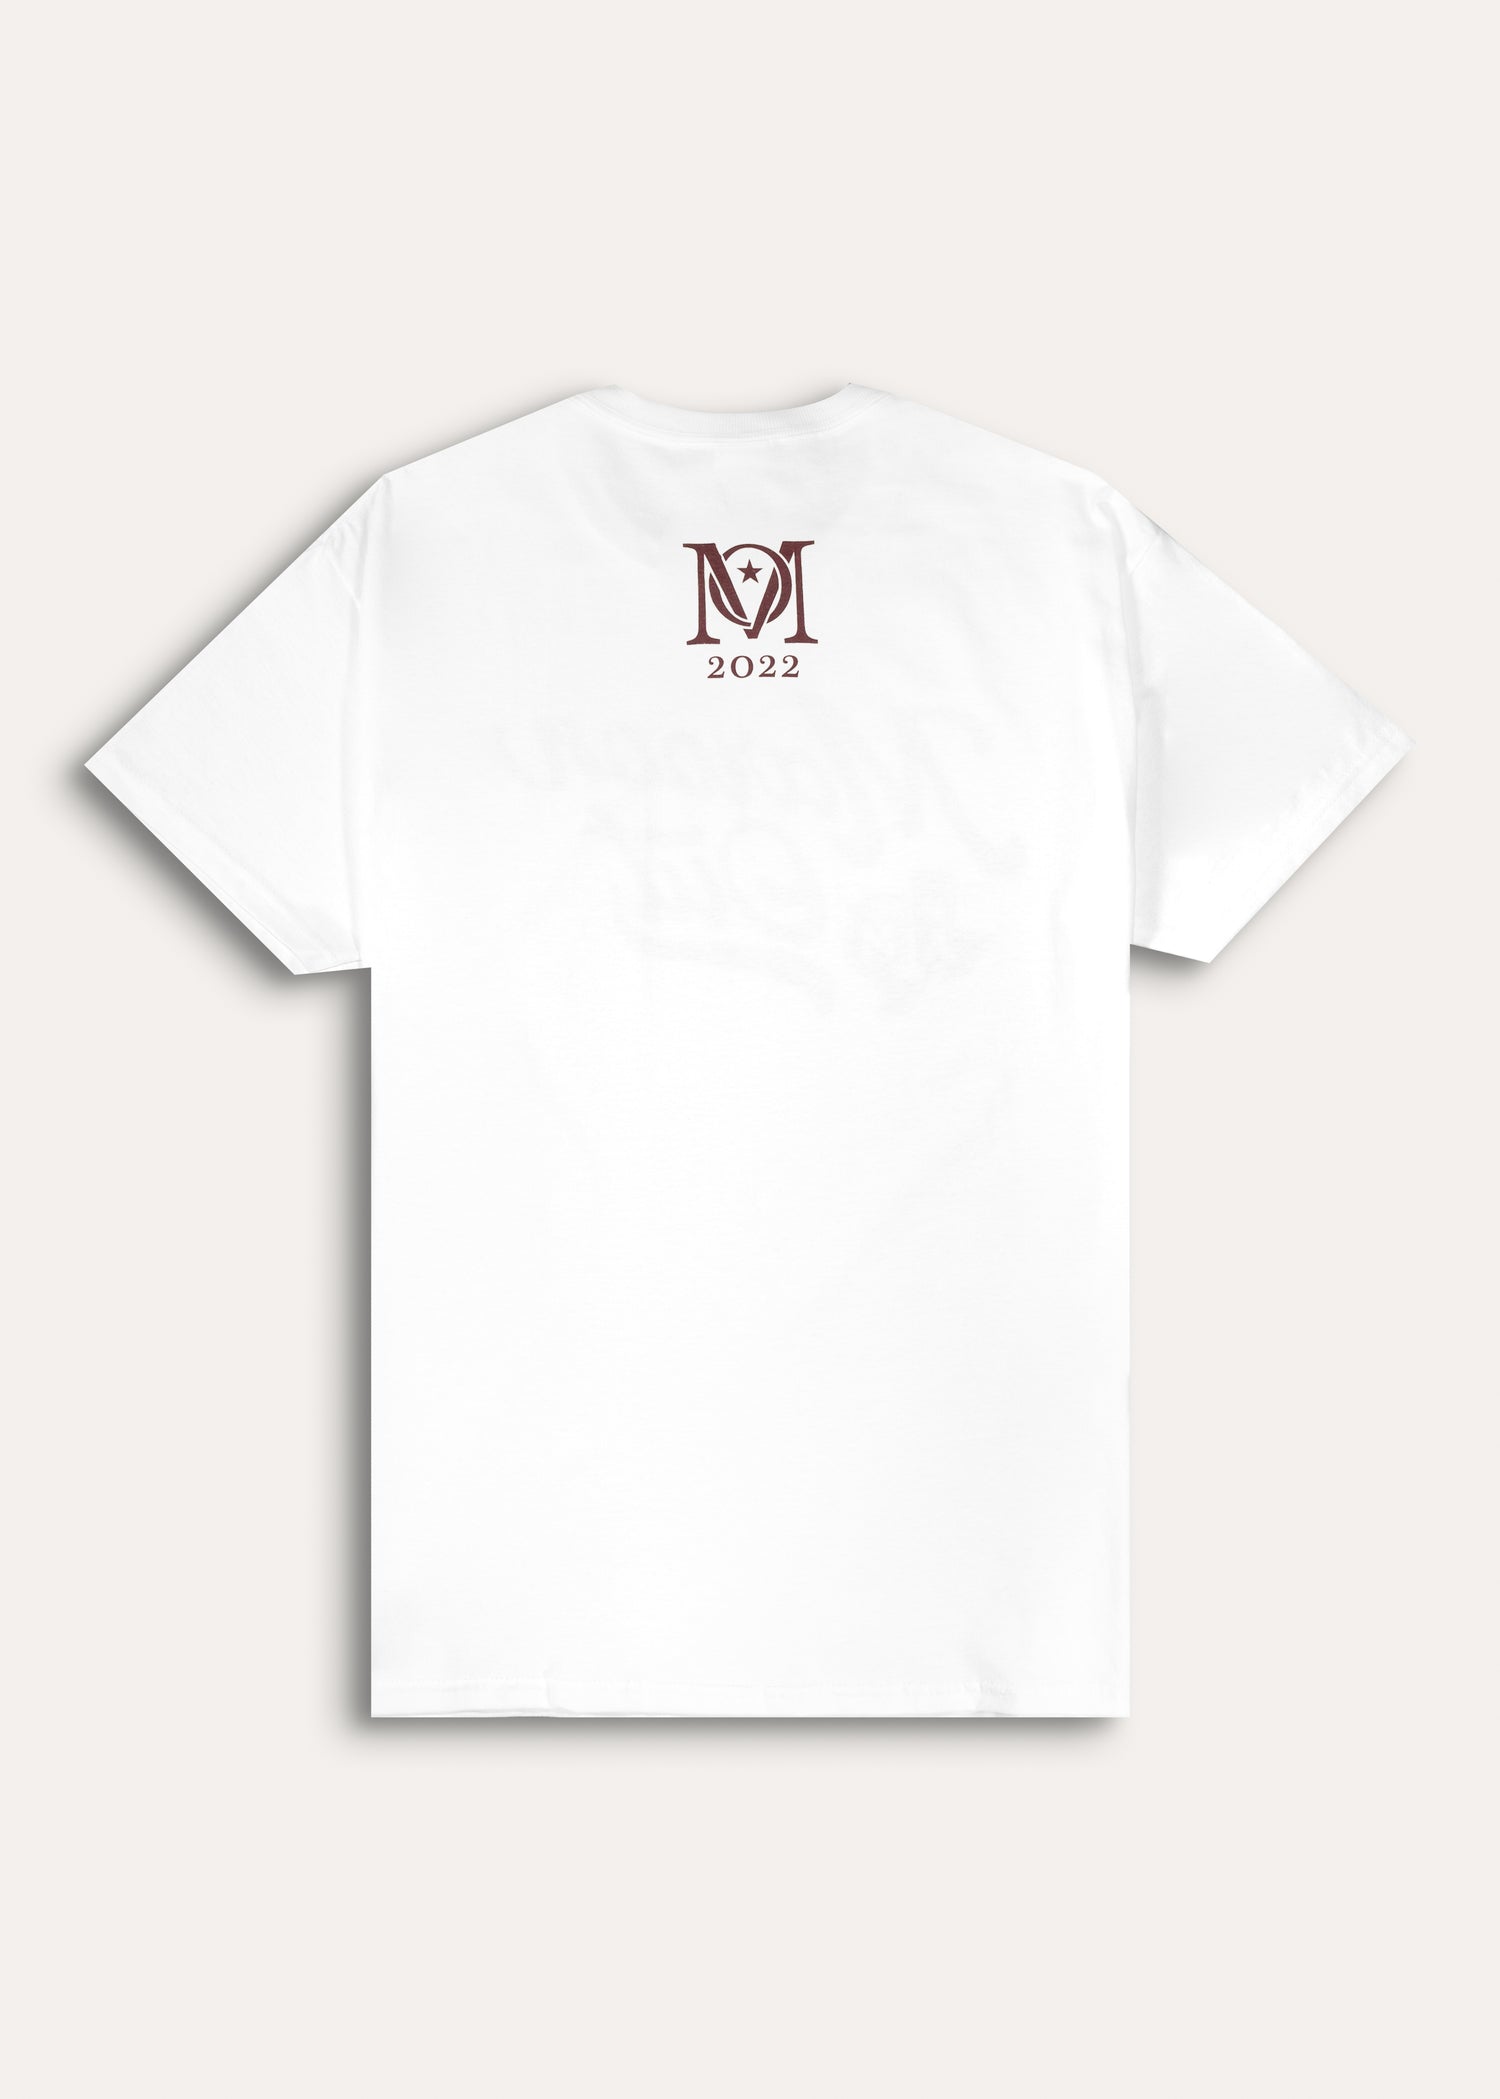 Texas A&M Maroon Out White Short Sleeve T-Shirt